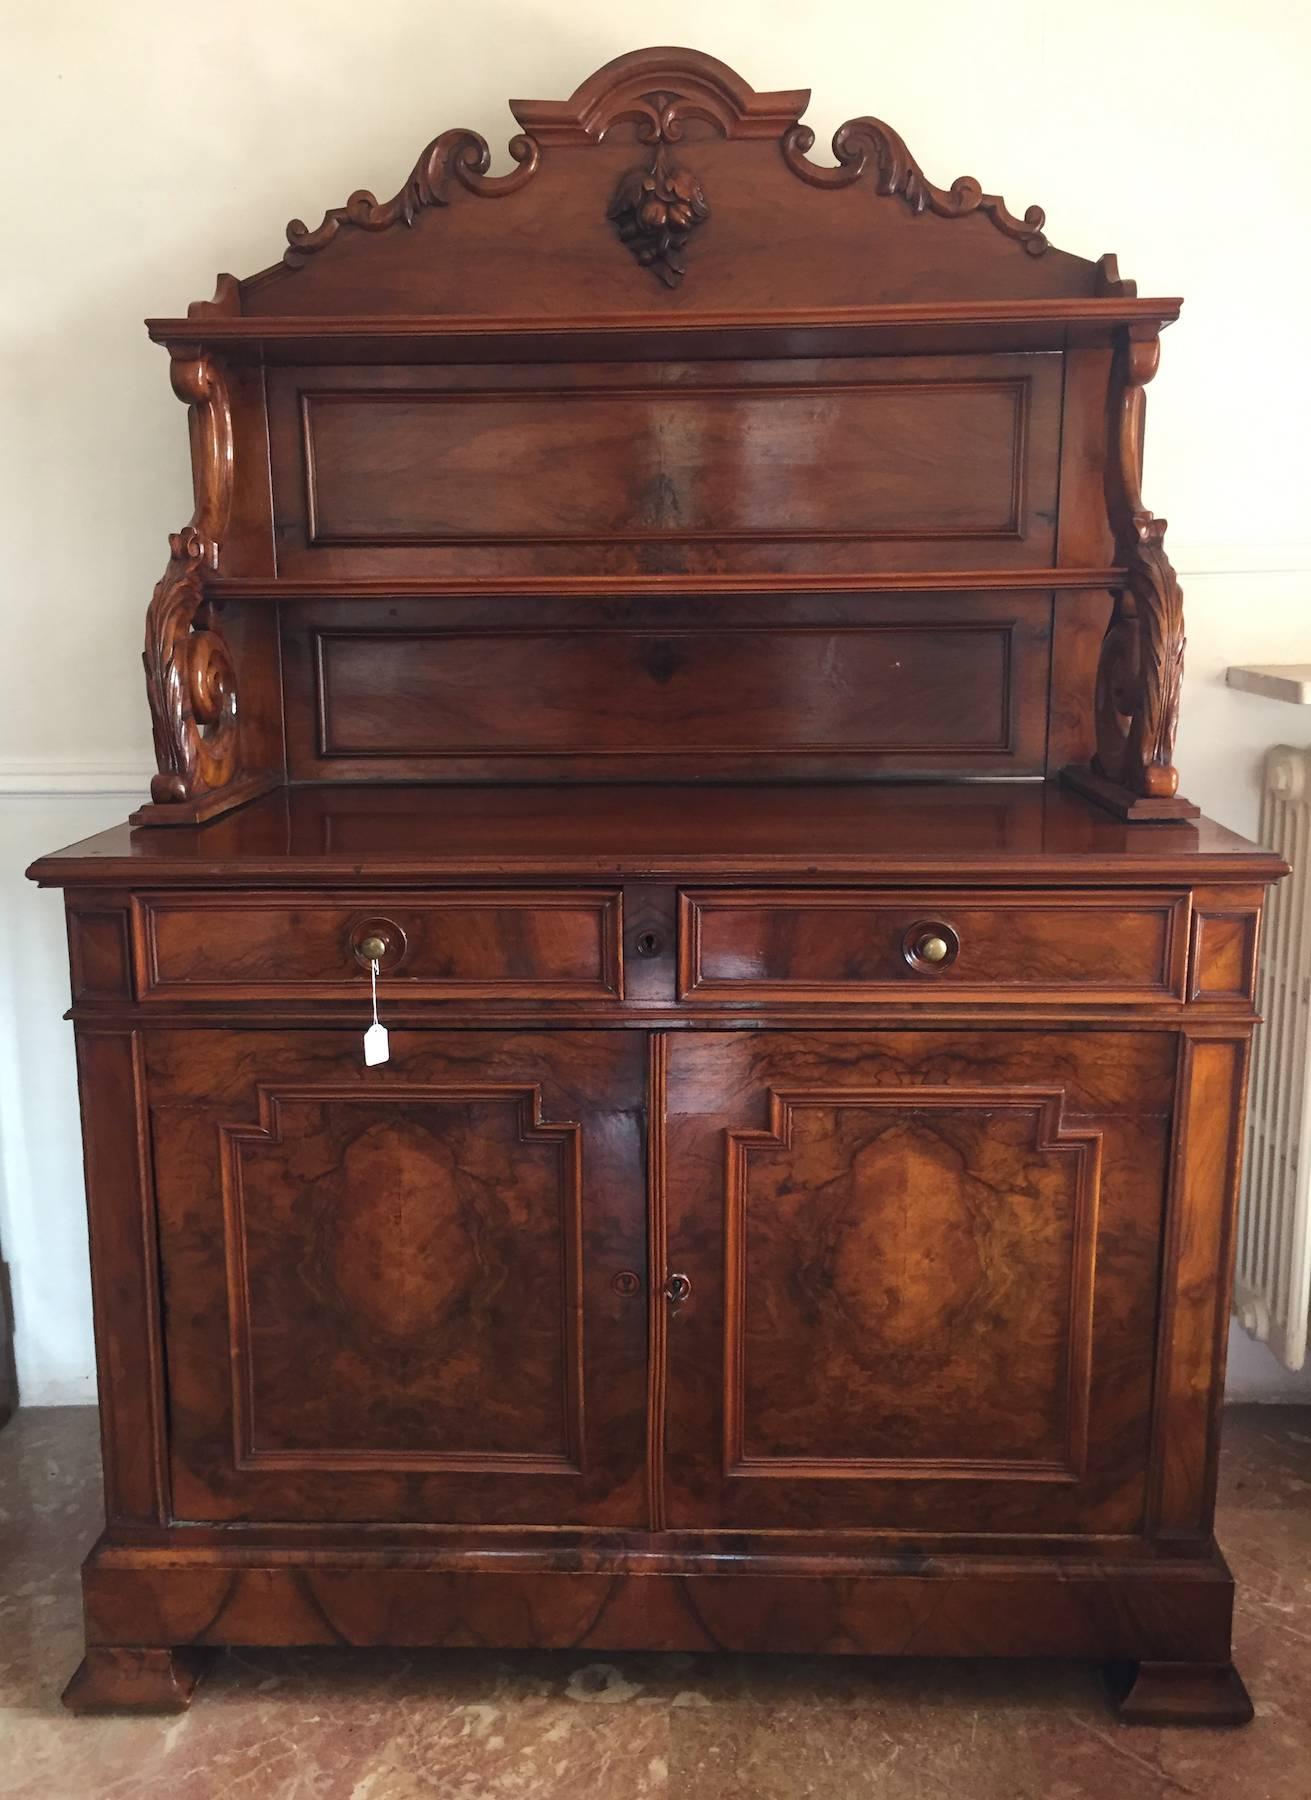 19th century French sideboard, beautiful carved top section support, nice radica walnut on the front.
The piece is in excellent condition and would be a beautiful addition to dining room or living room.